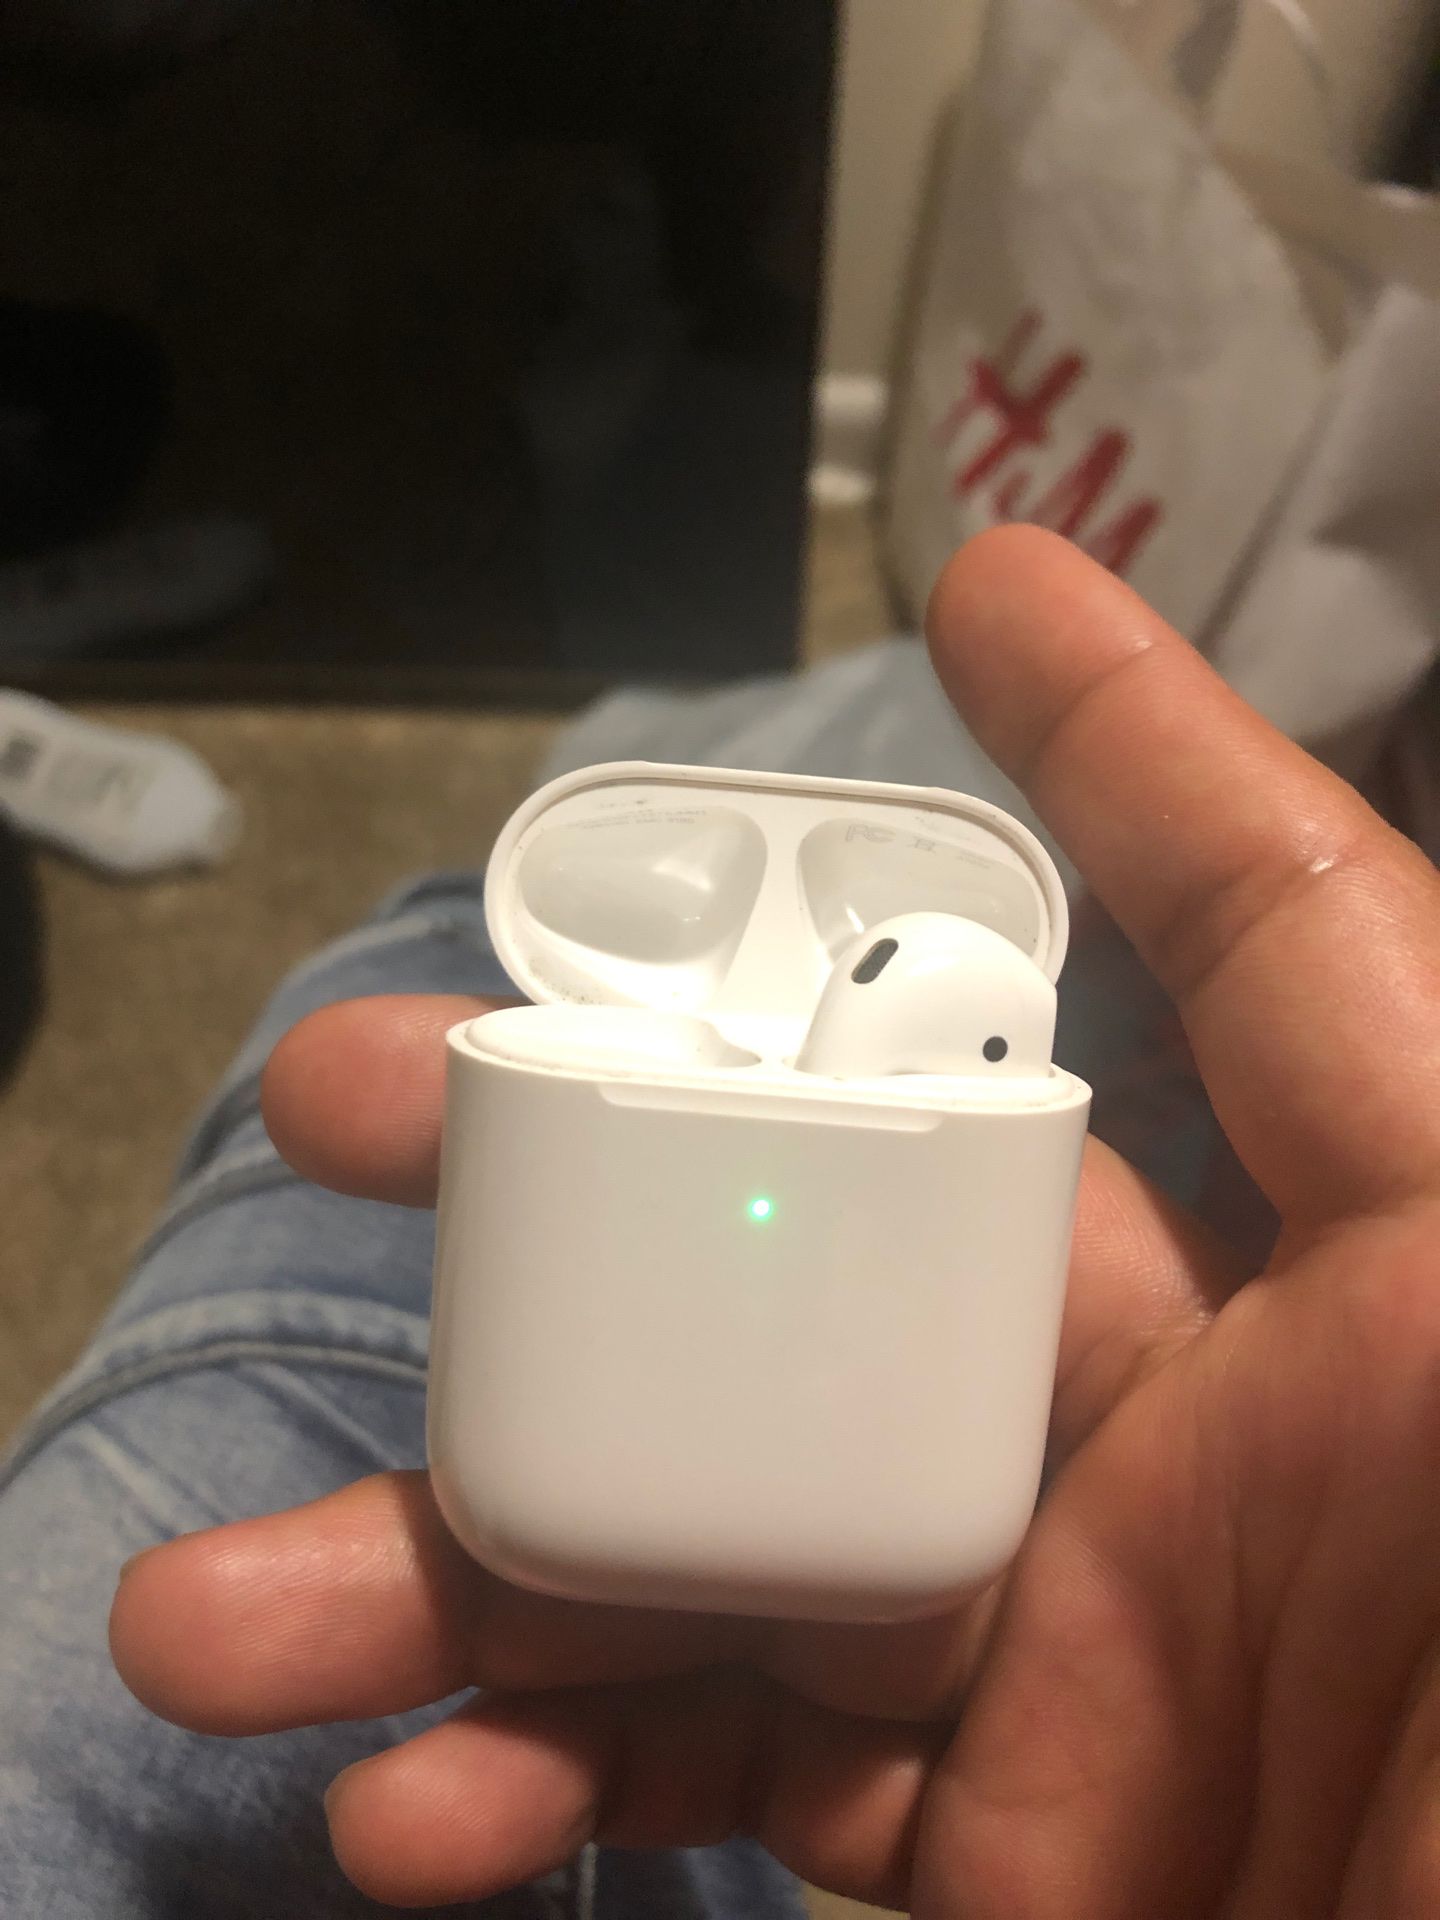 AirPod 2 left AirPod missing